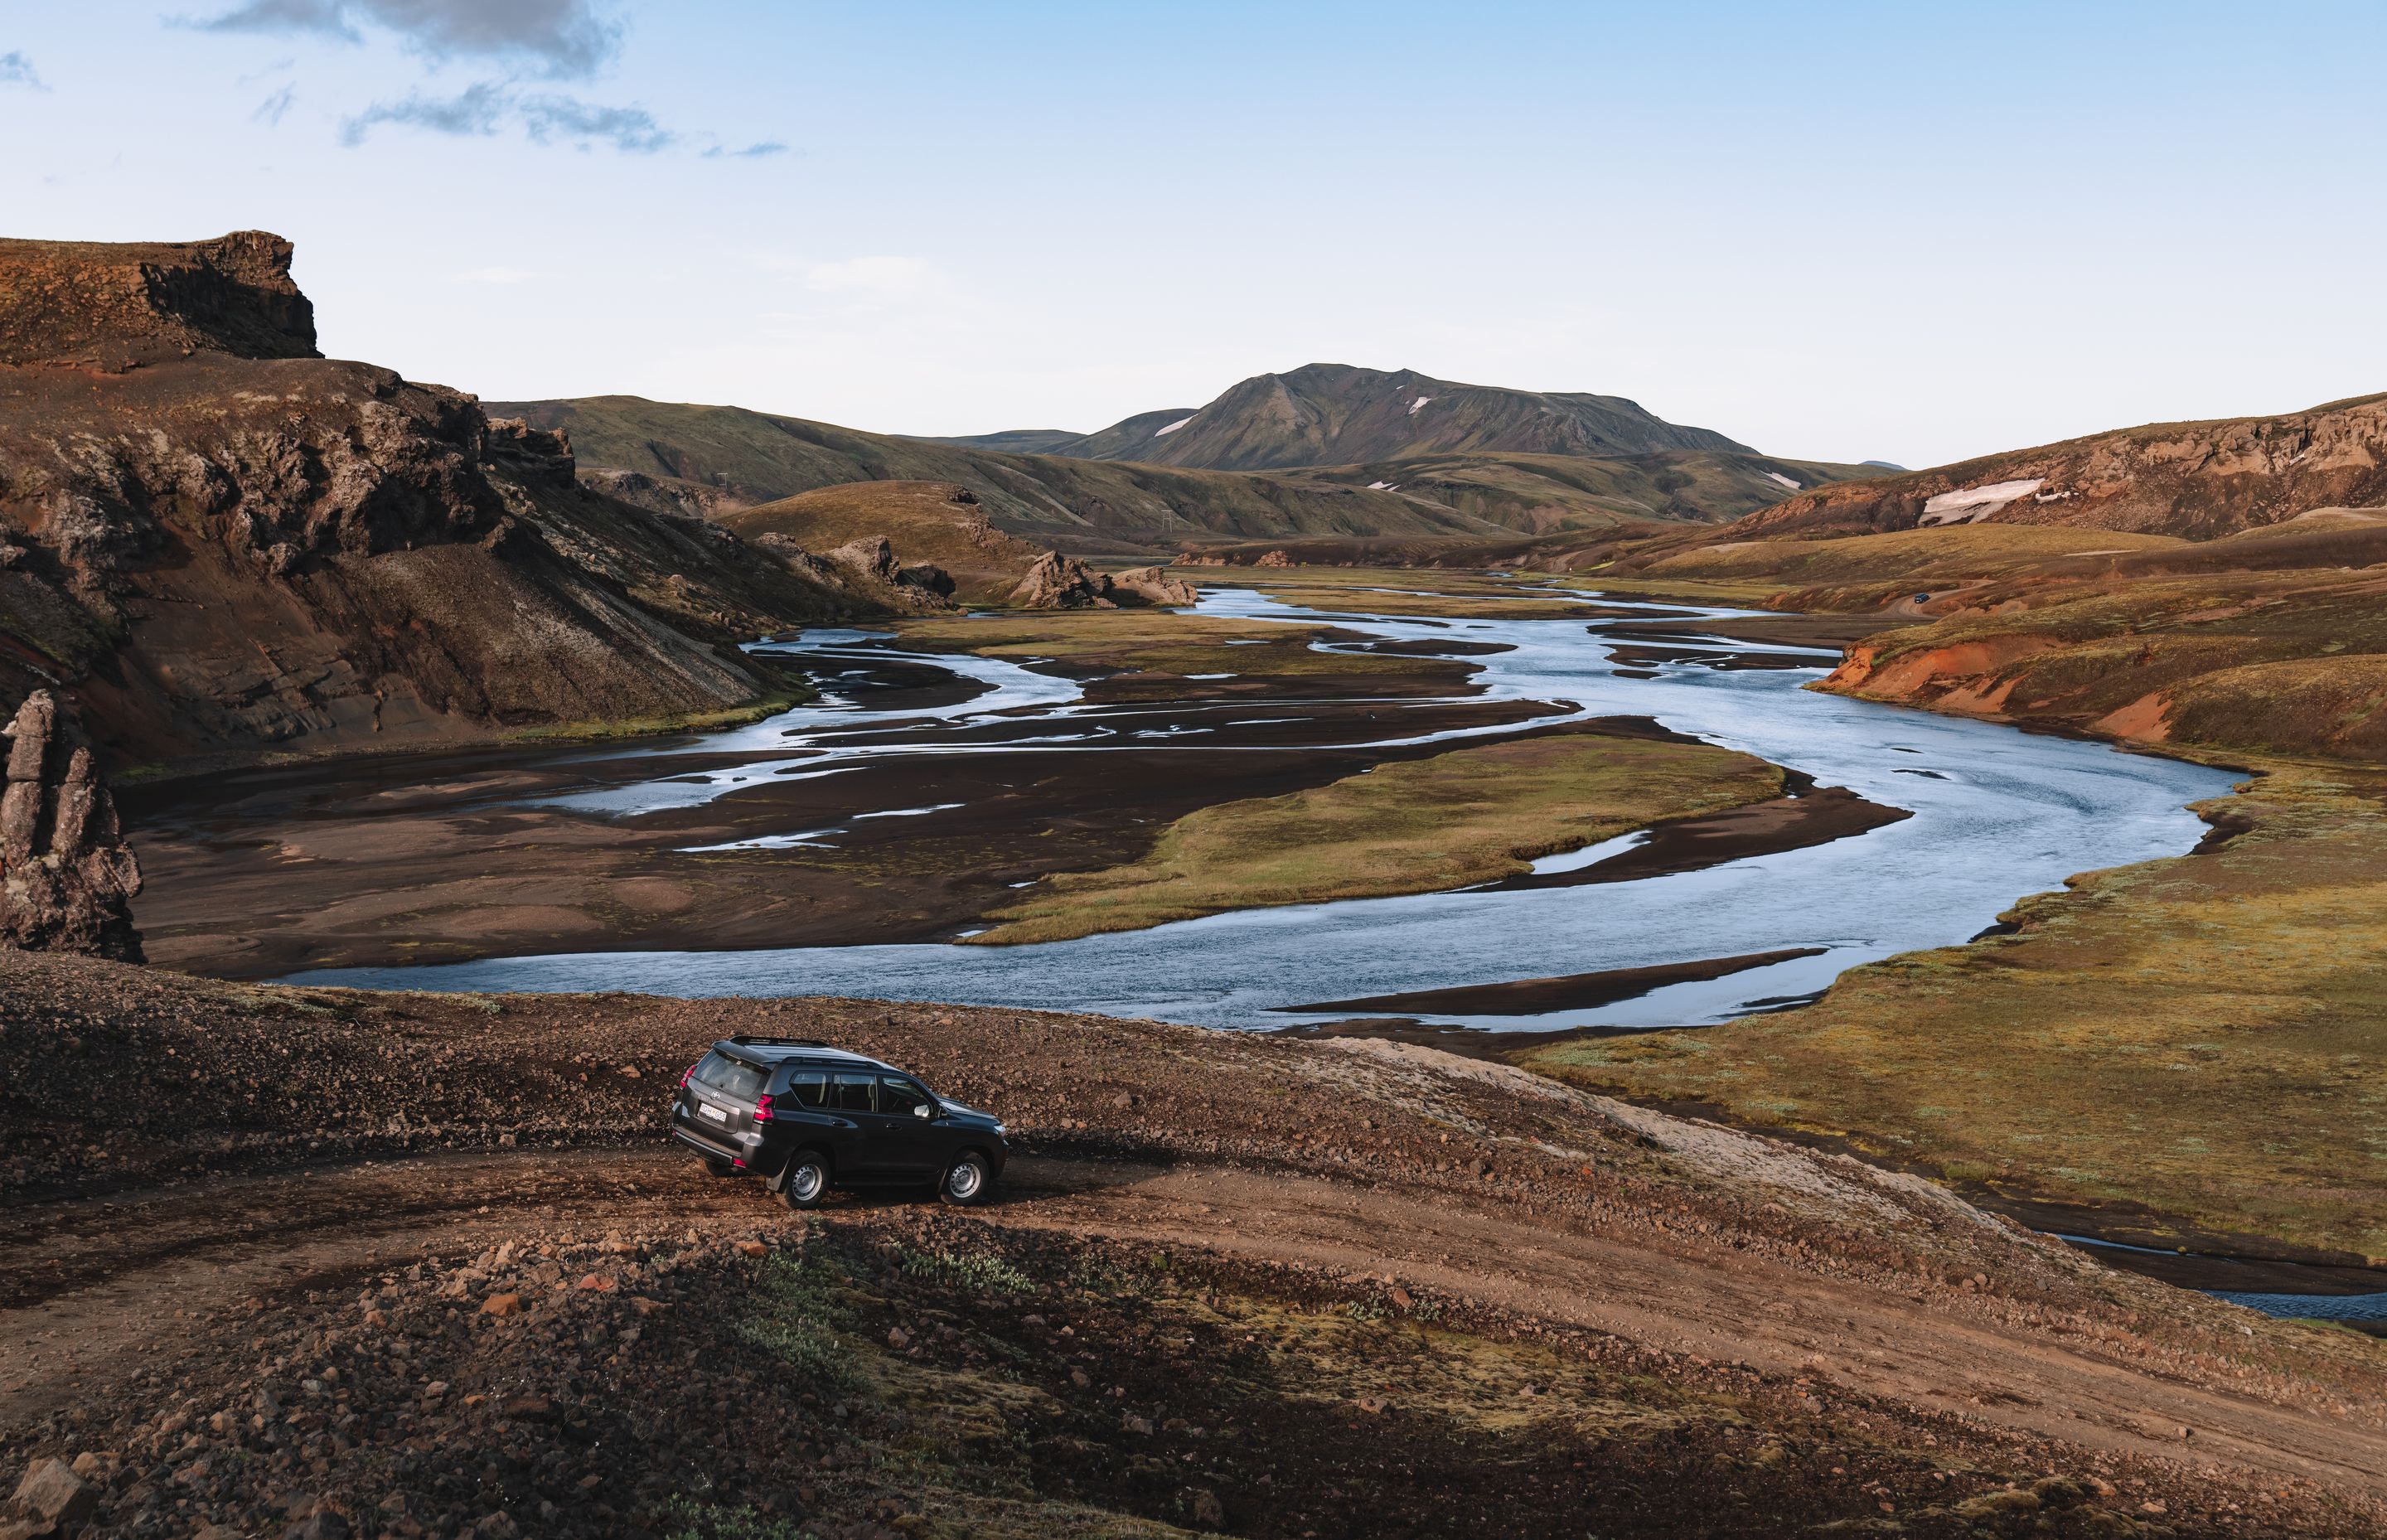 A Toyota Land Cruiser from Go Car Rental parked in Iceland with a captivating landscape backdrop featuring black sand beaches and the country's unique tectonic plates.